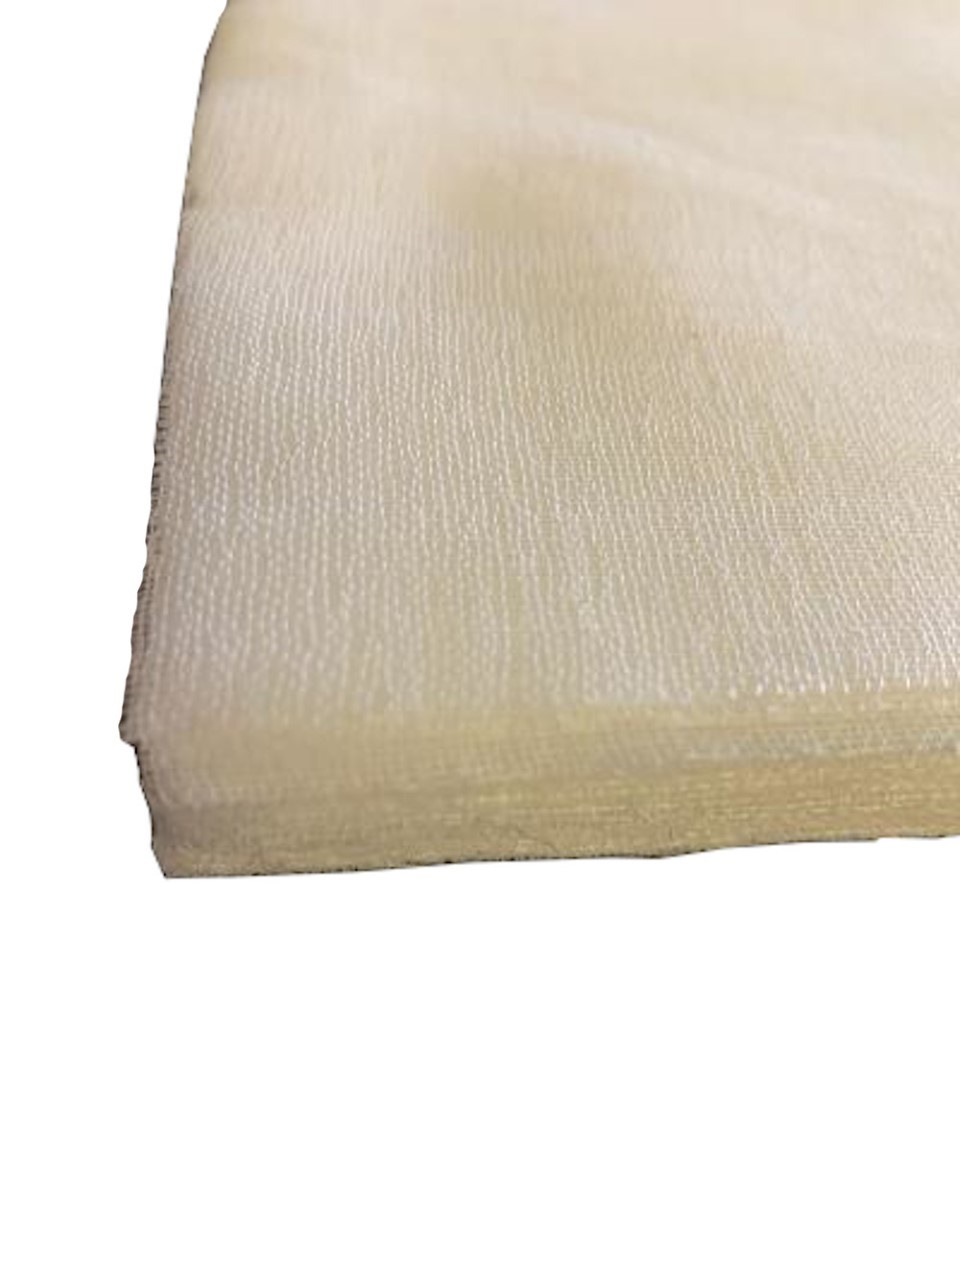 12" x 12" Grade 90 Cheesecloth Bleached Squares 100 Pk - Click Image to Close